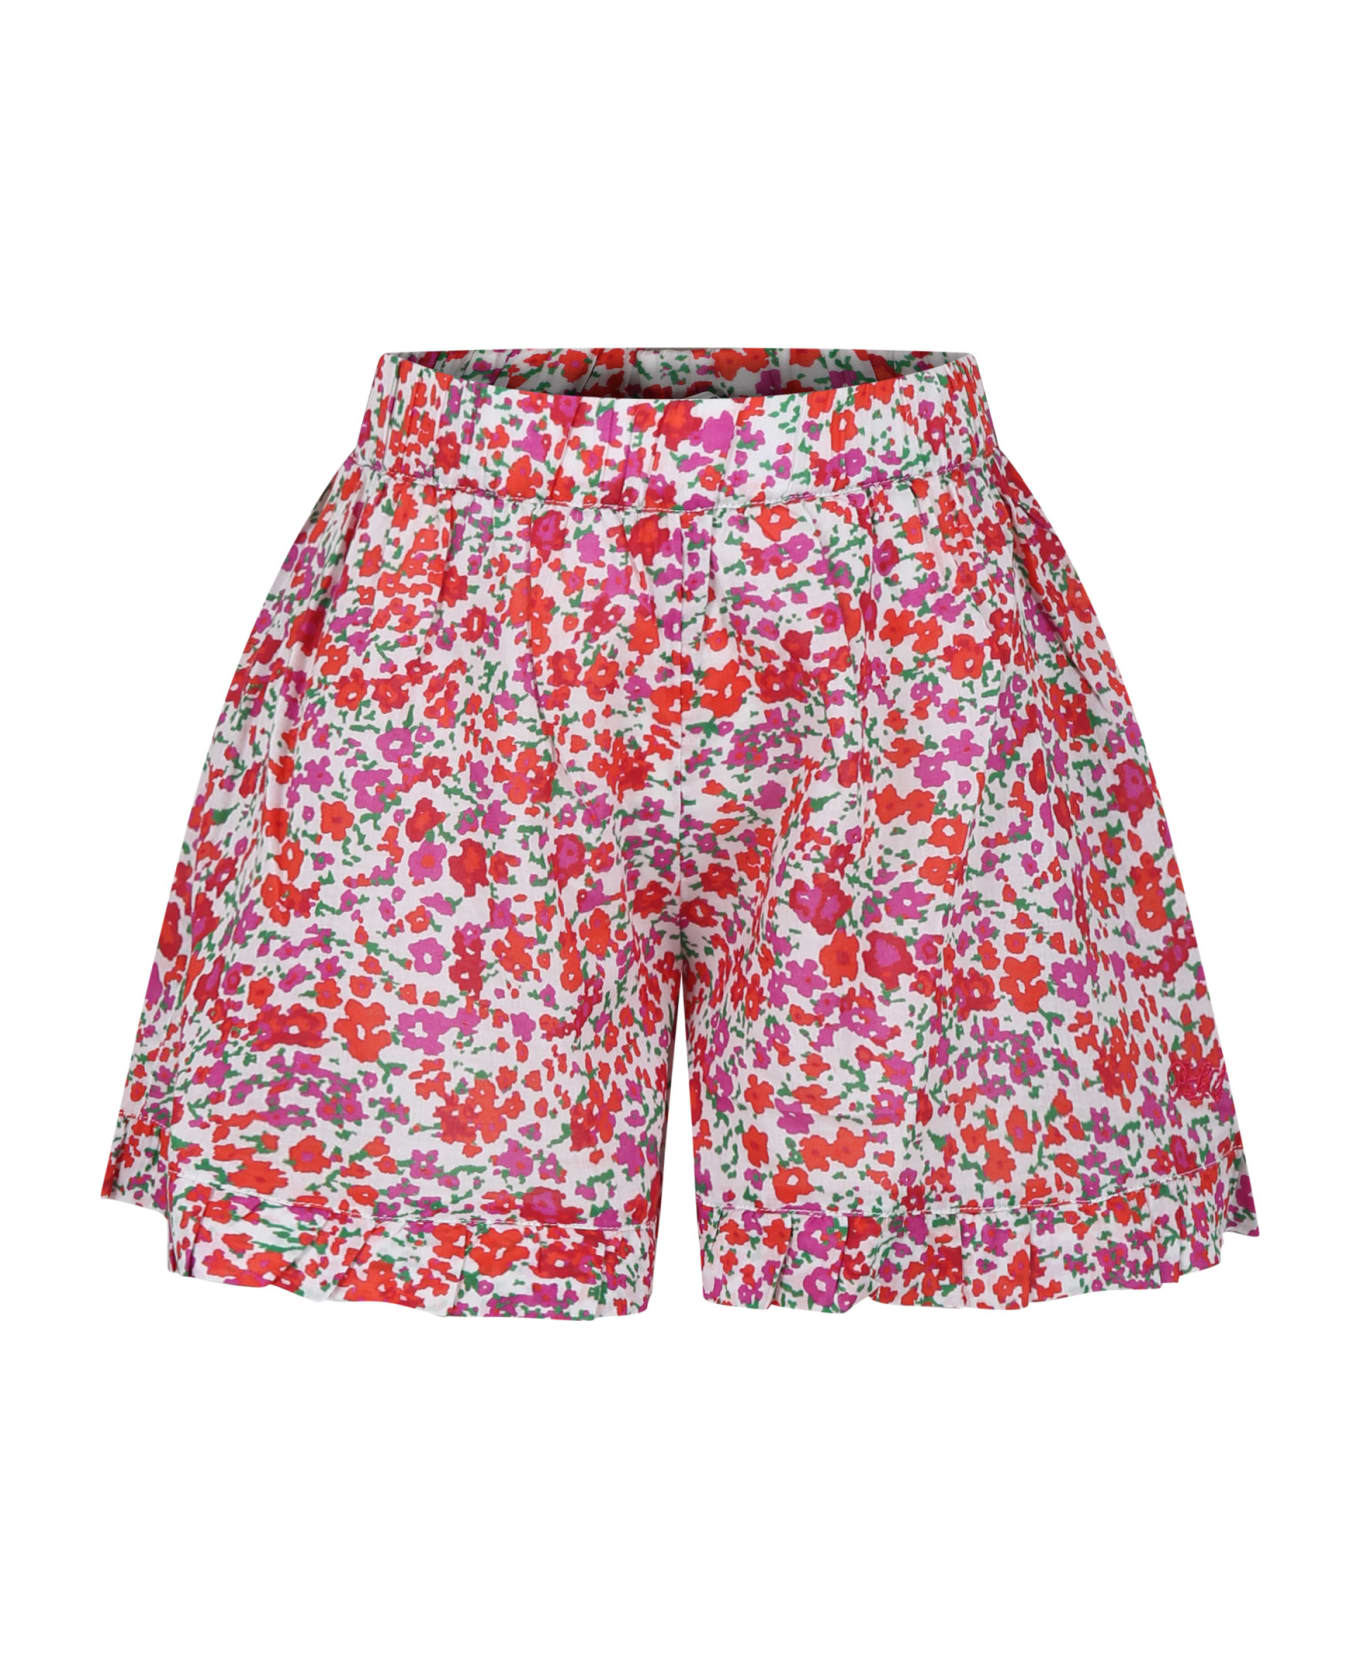 Philosophy di Lorenzo Serafini Kids White Shorts For Girl With Flowers - Rosso